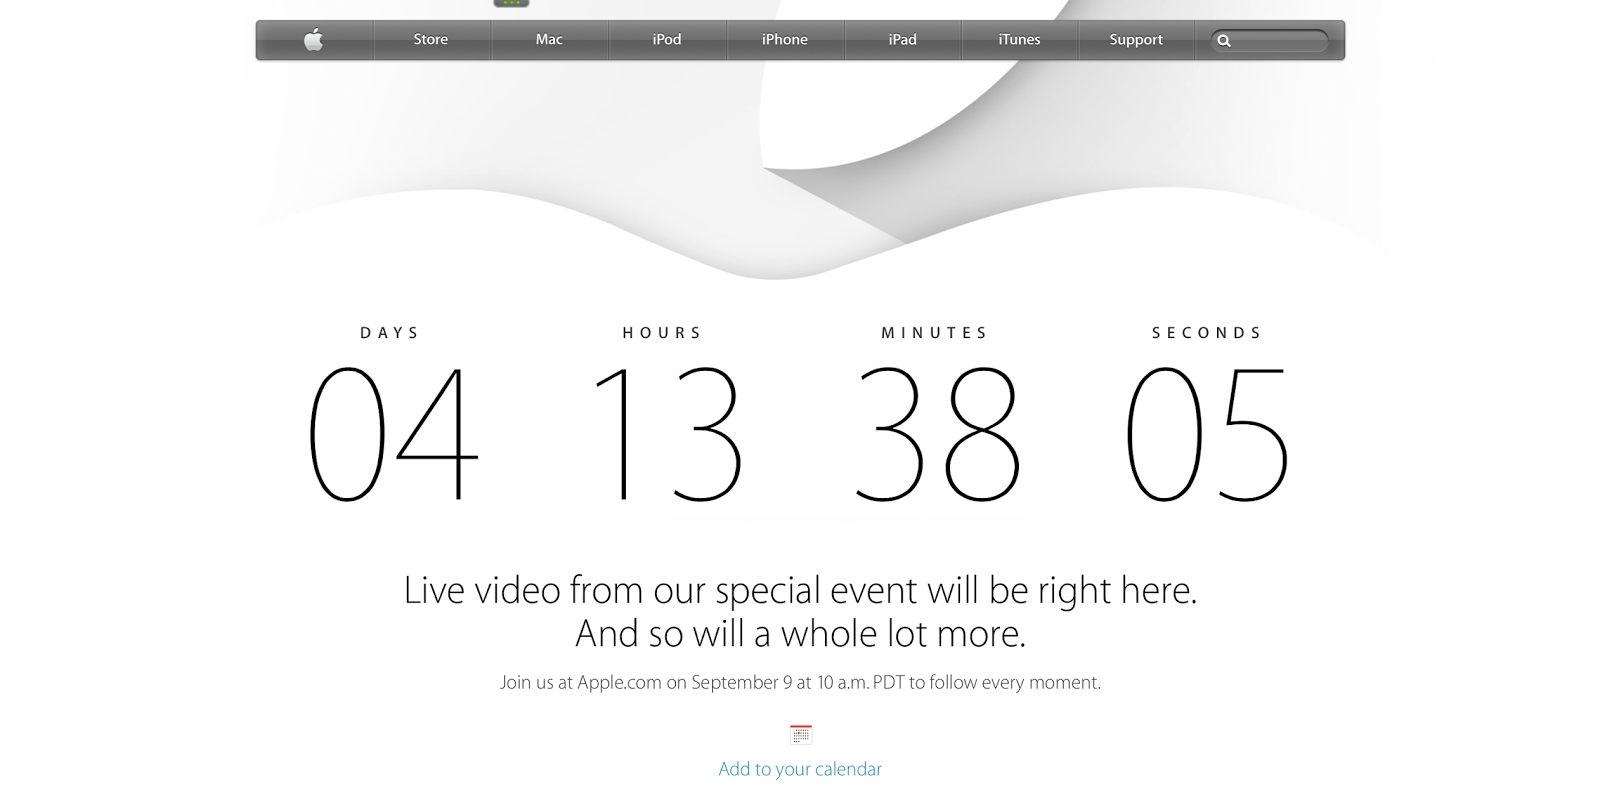 Tech Talk 4 Geeks: Apple Makes Page With Countdown For Iphone 6 Event Iphone 6 Calendar Countdown